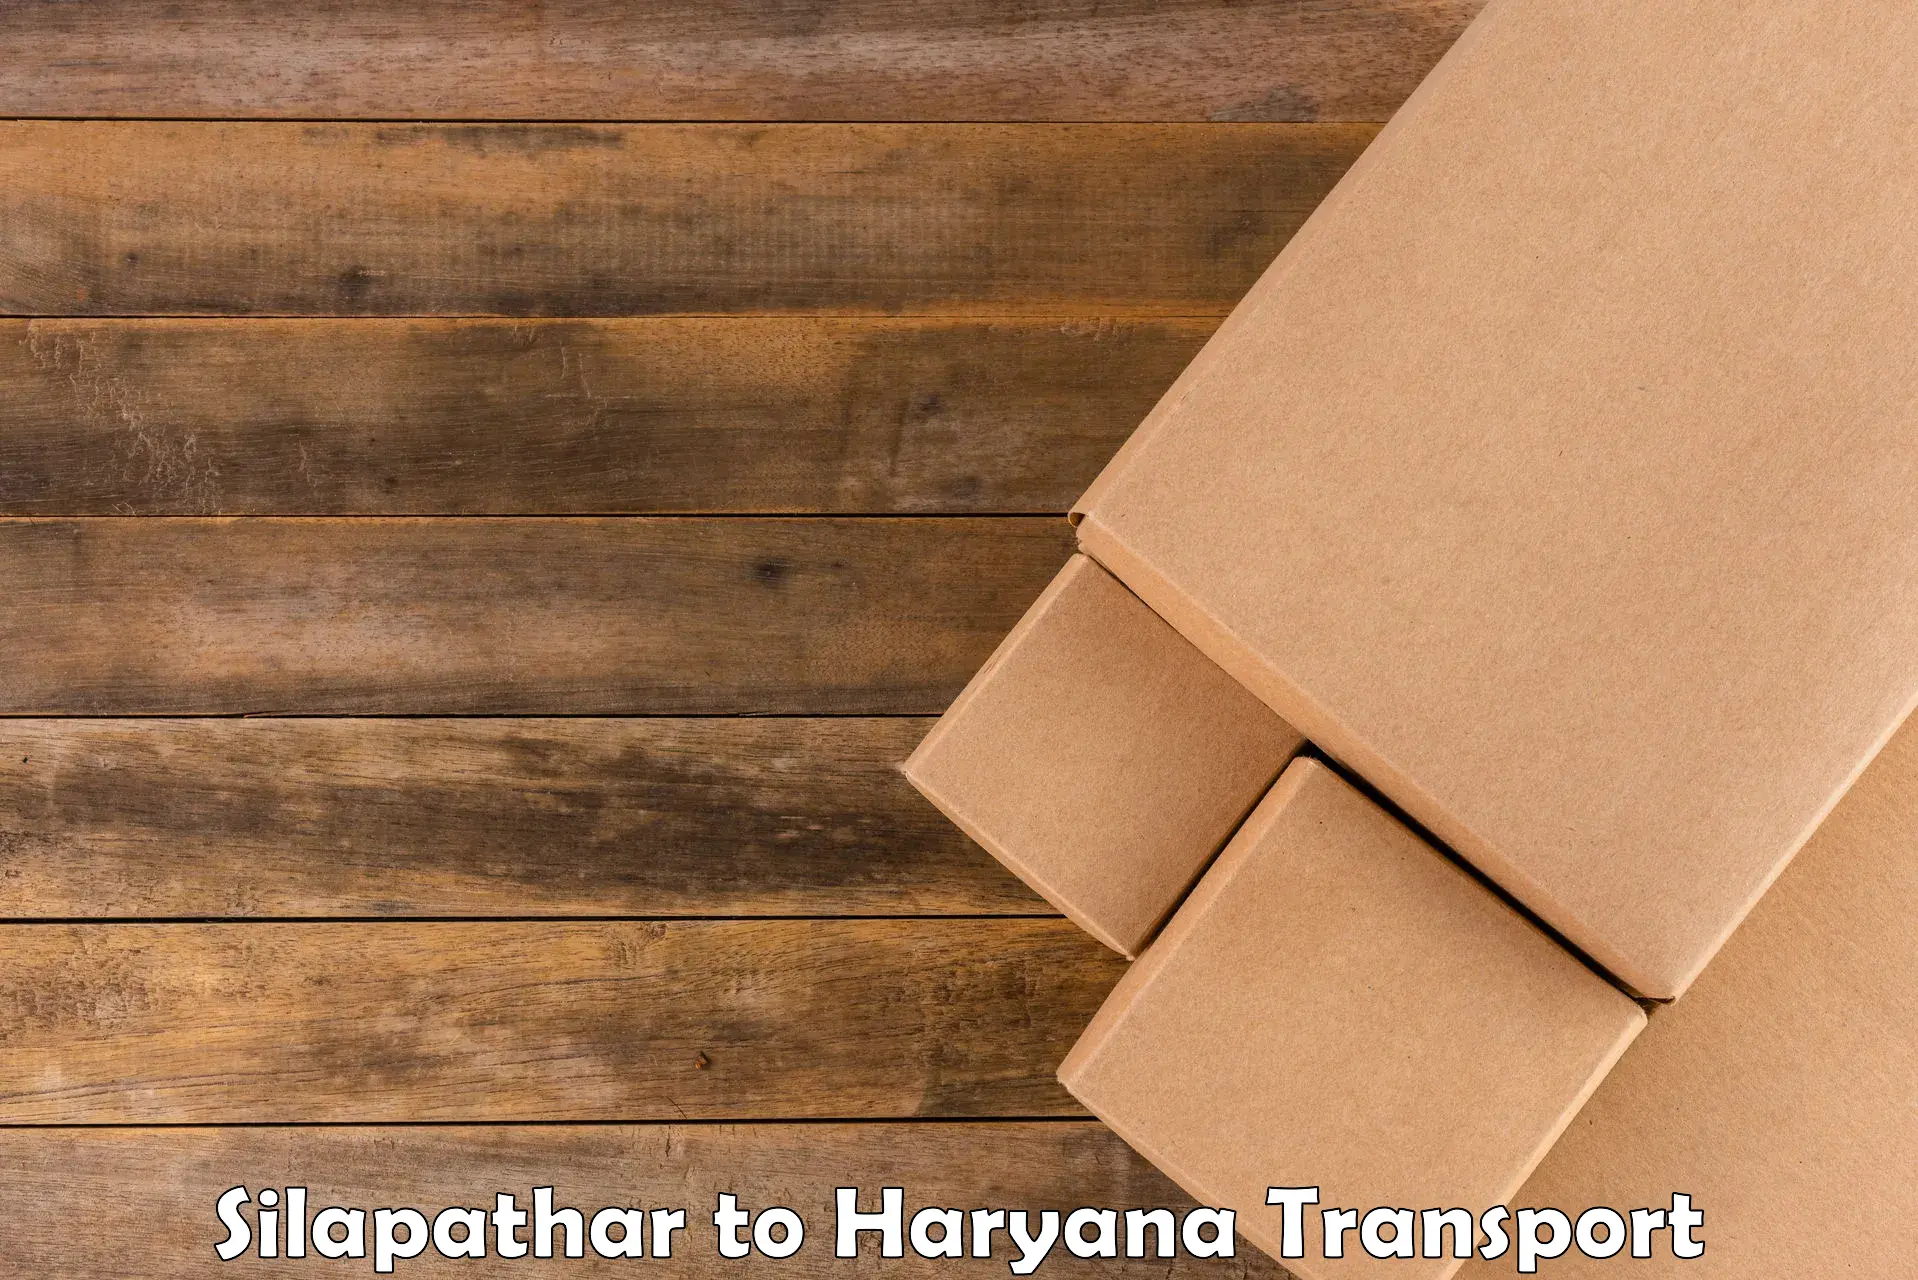 Online transport service Silapathar to Panipat